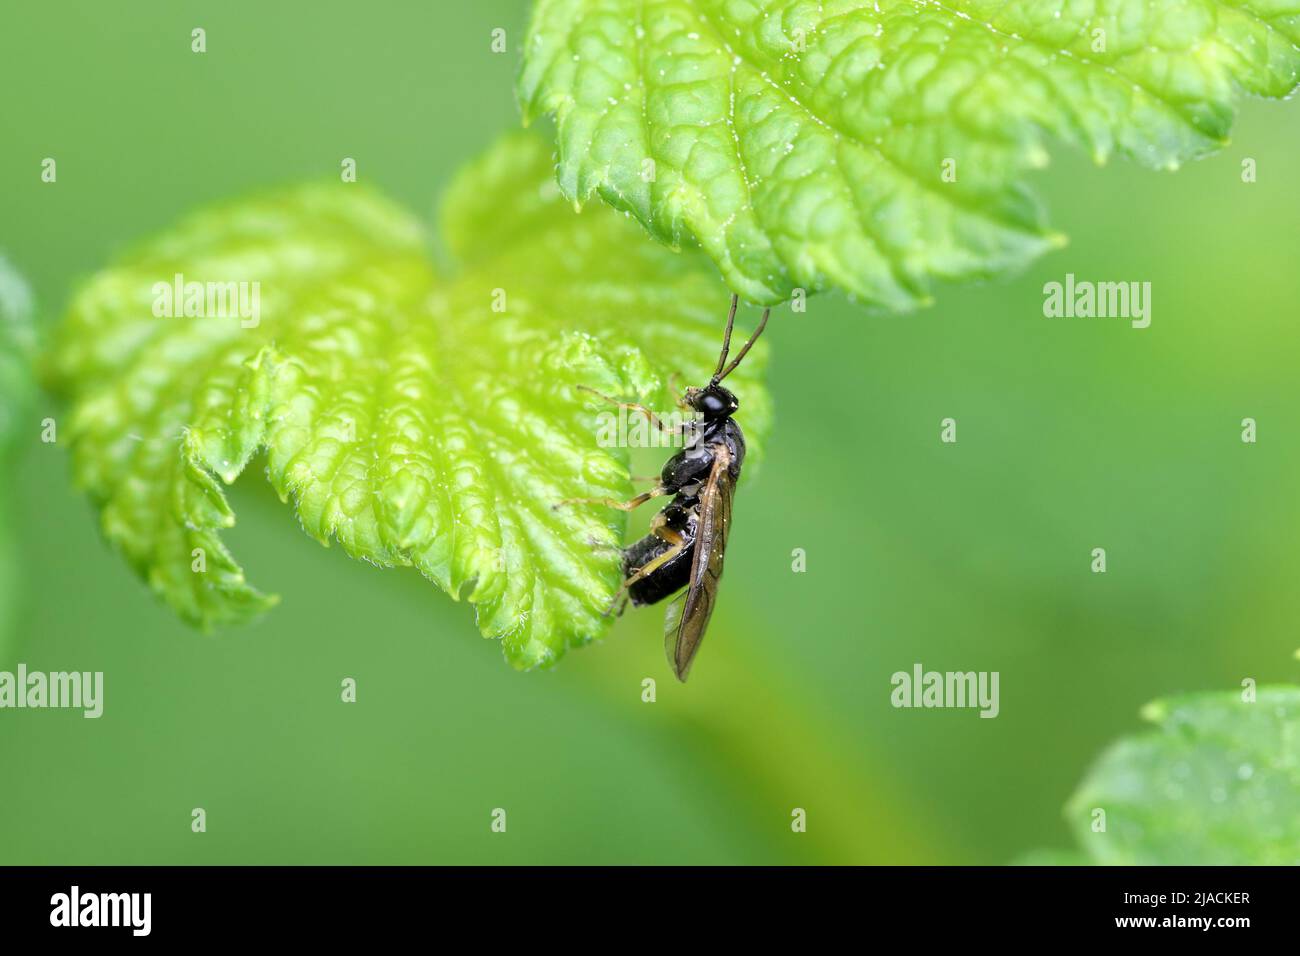 Common gooseberry sawfly Pristiphora appendiculata laying eggs into a currant leaf. This pest can rapidly defoliate gooseberry plants. Stock Photo